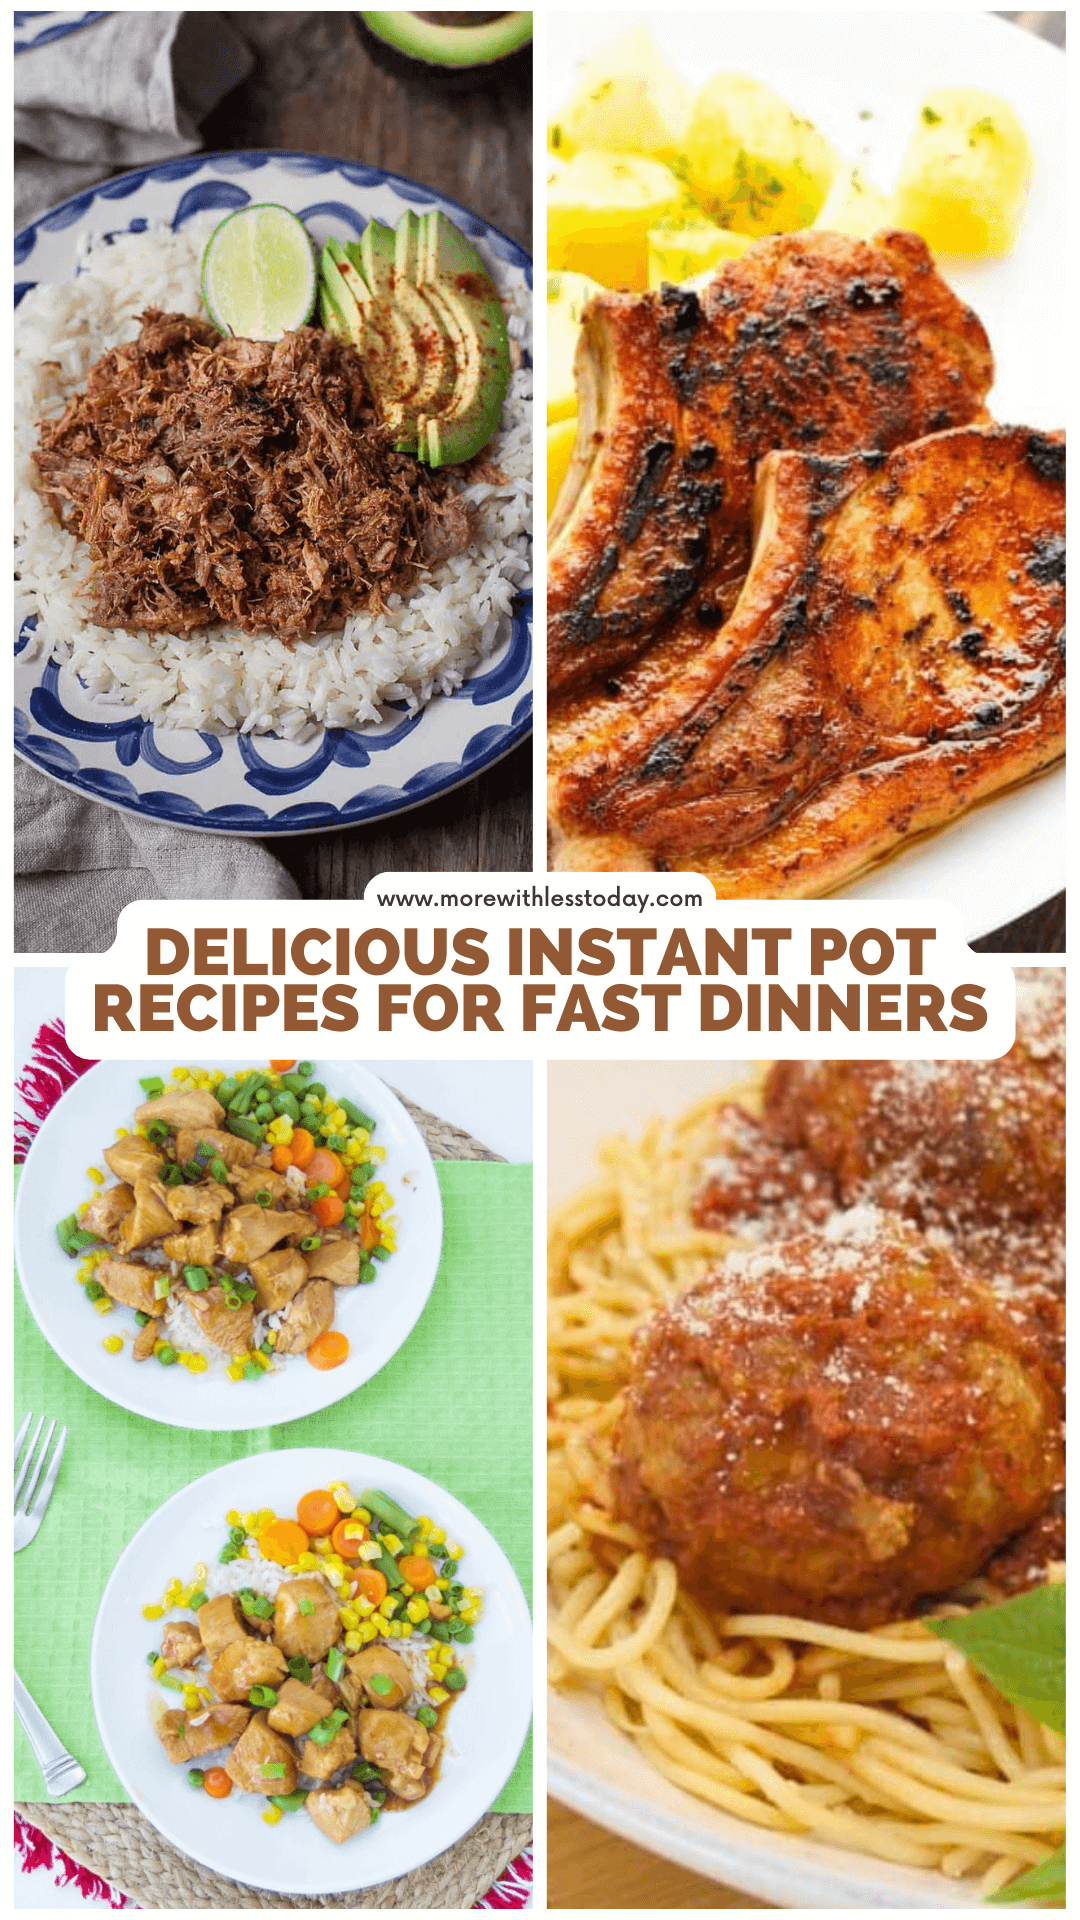 Delicious Instant Pot Recipes for Fast Dinners - PIN